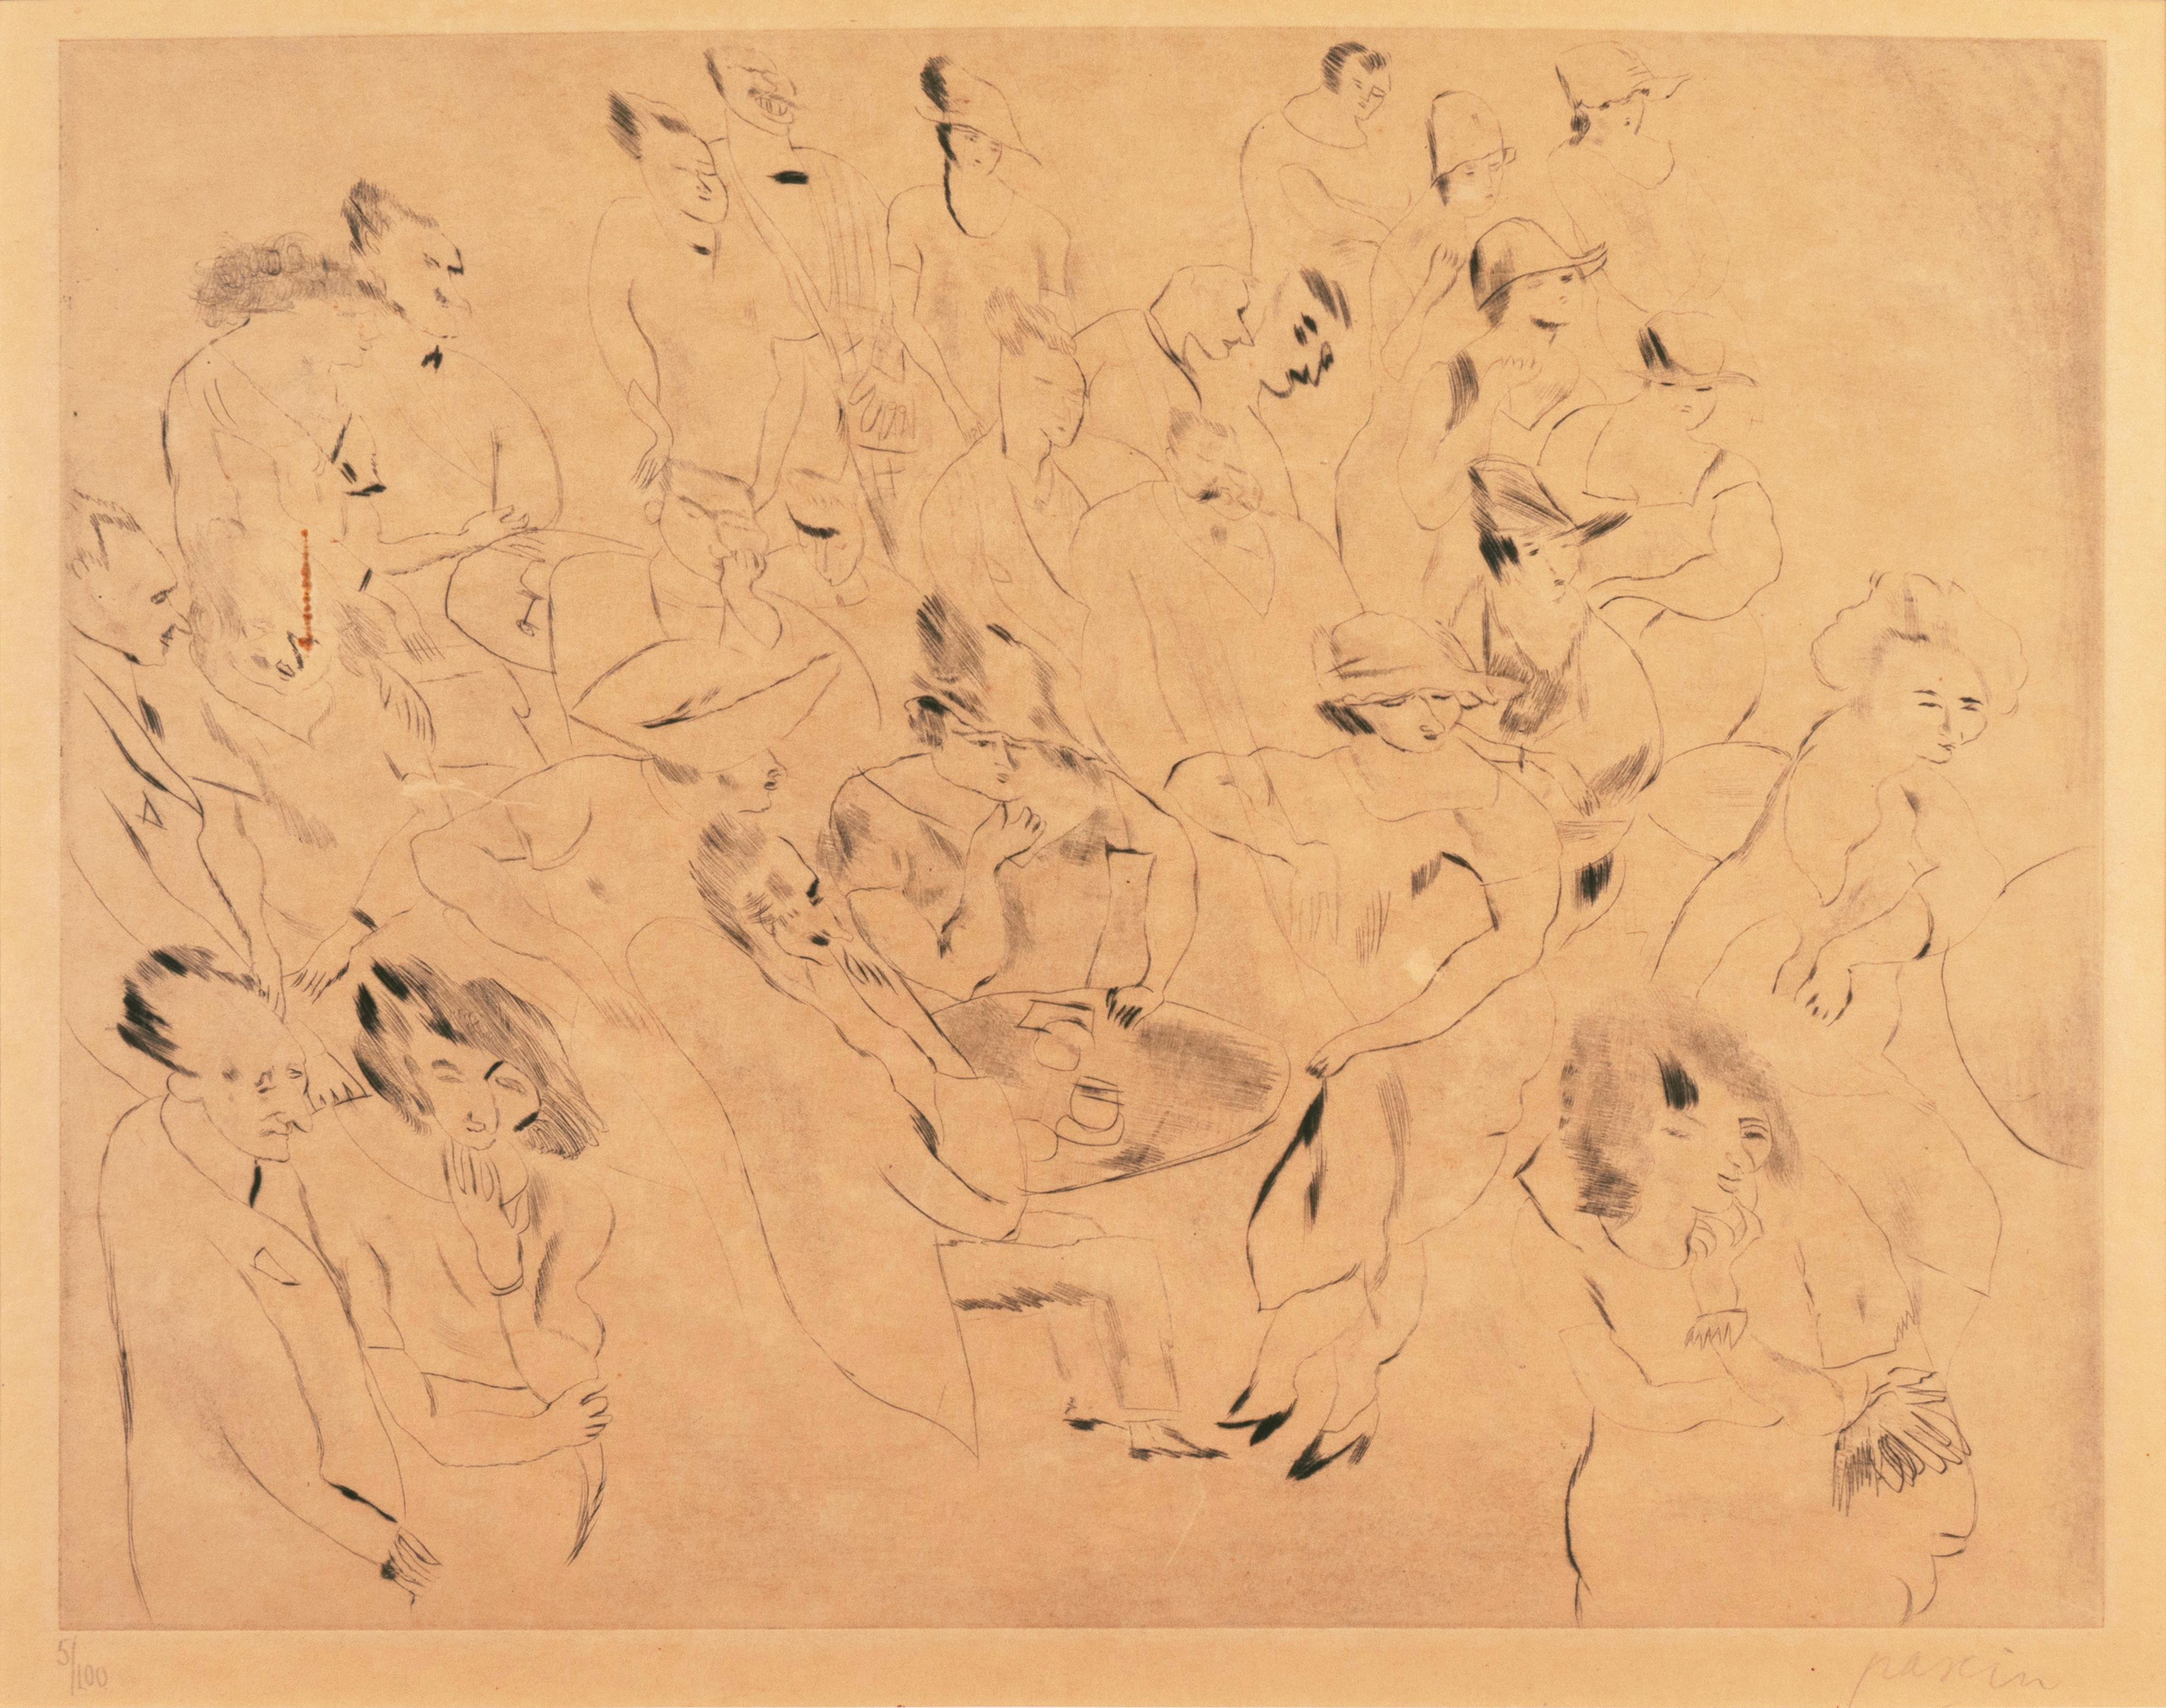 School of Paris etching, 'At the Cafe' by the Prince of Montparnasse - Print by Jules Pascin